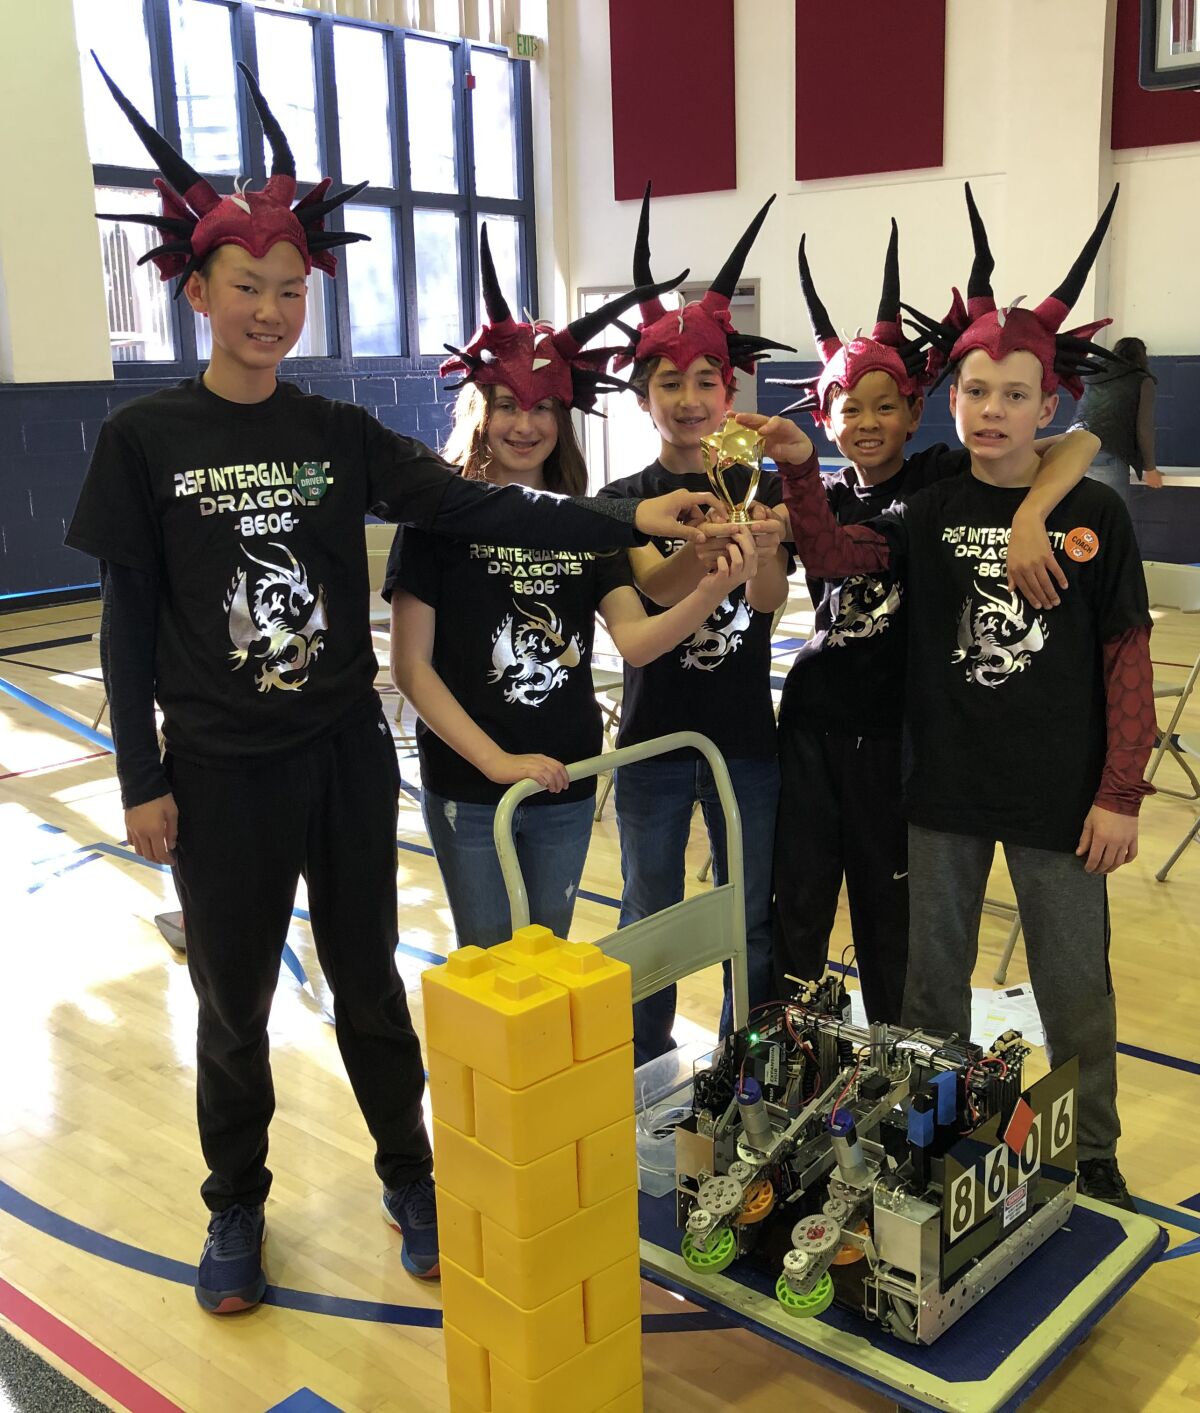 First place trophy winners: Rowe team #8606 Intergalactic Dragons